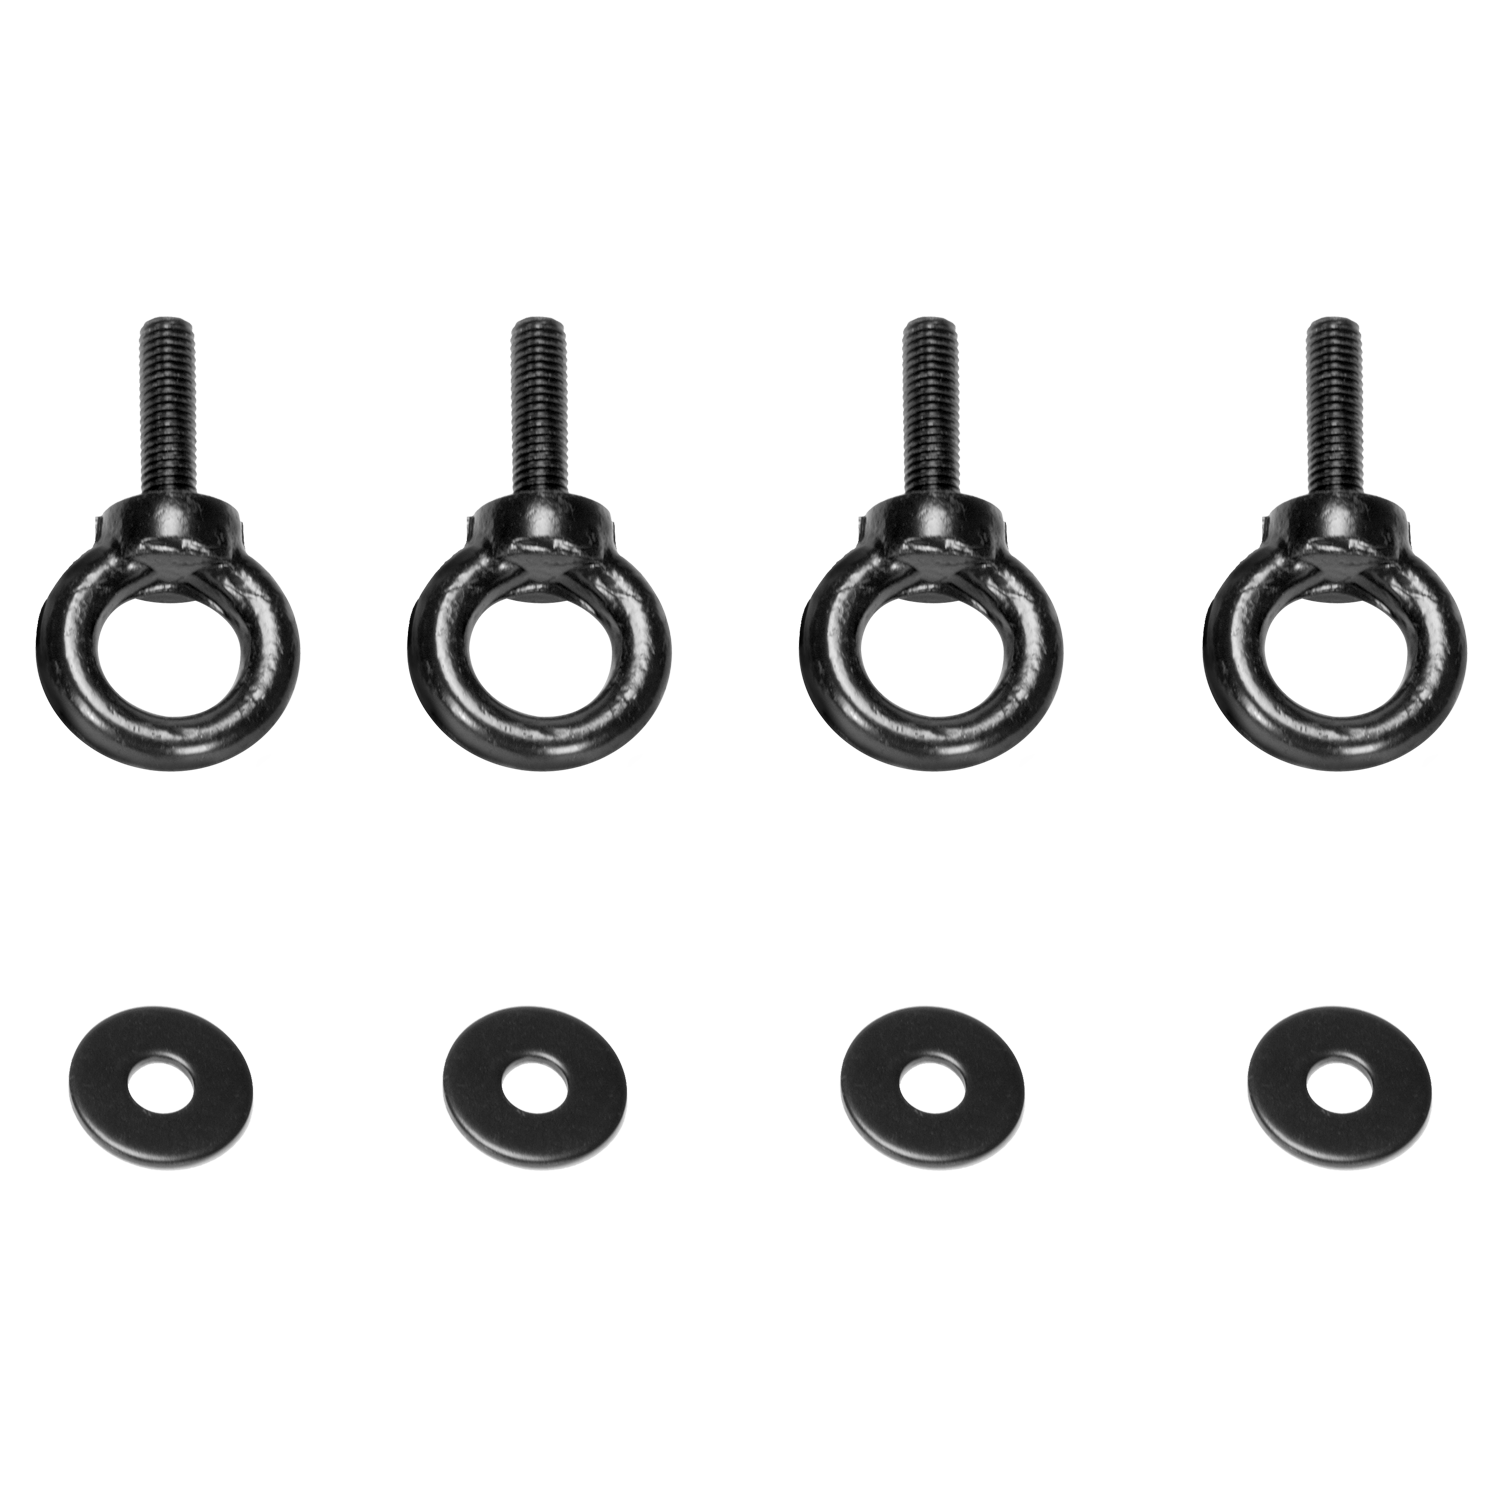 Mackie PA-A2 Eye Bolt Kit Fits DRM, HD, iP and SRM Professional loudspeakers